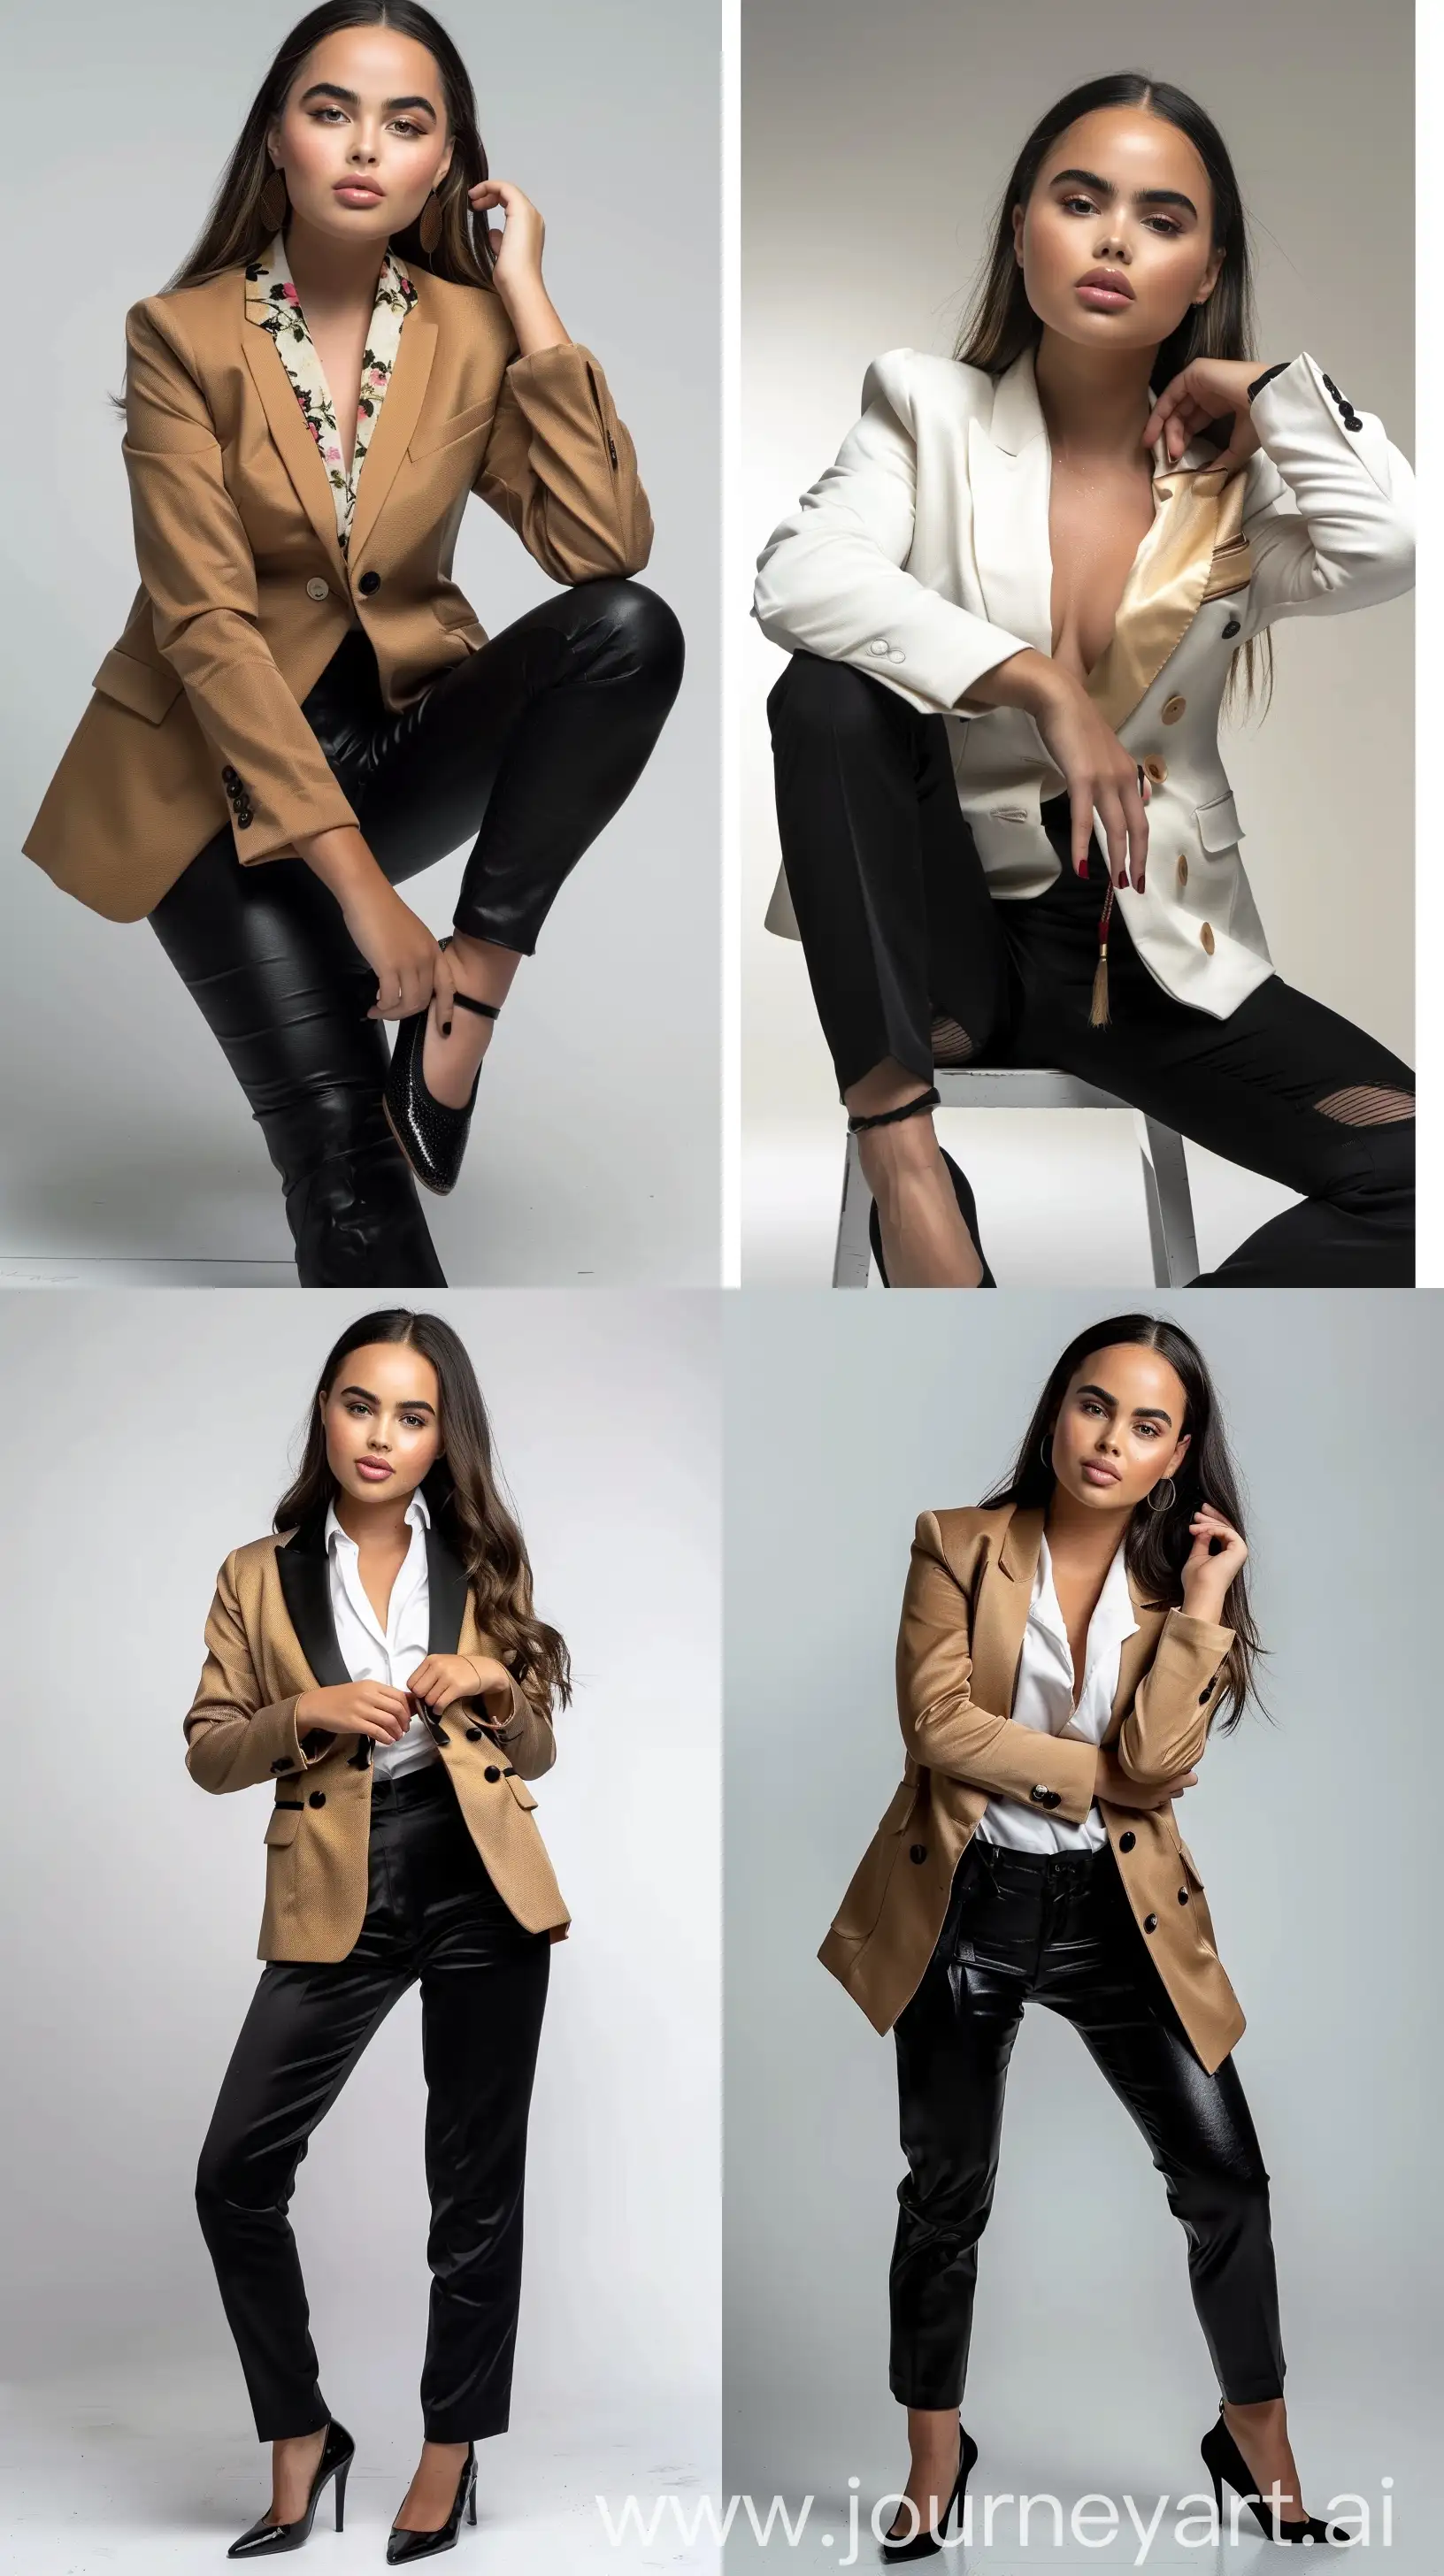 An elegant woman wearing a color #CAB8A1 blazer in a photo shoot with black shoes, white background, and natural lighting --cref https://cdn.discordapp.com/attachments/997271750368833636/1222271417341448372/expert_upscayl_4x_realesrgan-x4plus.png?ex=66159bf6&is=660326f6&hm=fd529ad60032841a143c643f35d7df741f1871c8aab34df177eaea3bf4865b9c& --sref https://i.pinimg.com/564x/5c/d7/10/5cd710f20f2097b51c68f5c6b240648d.jpg --style raw --ar 9:16 --v 6 --cw 0